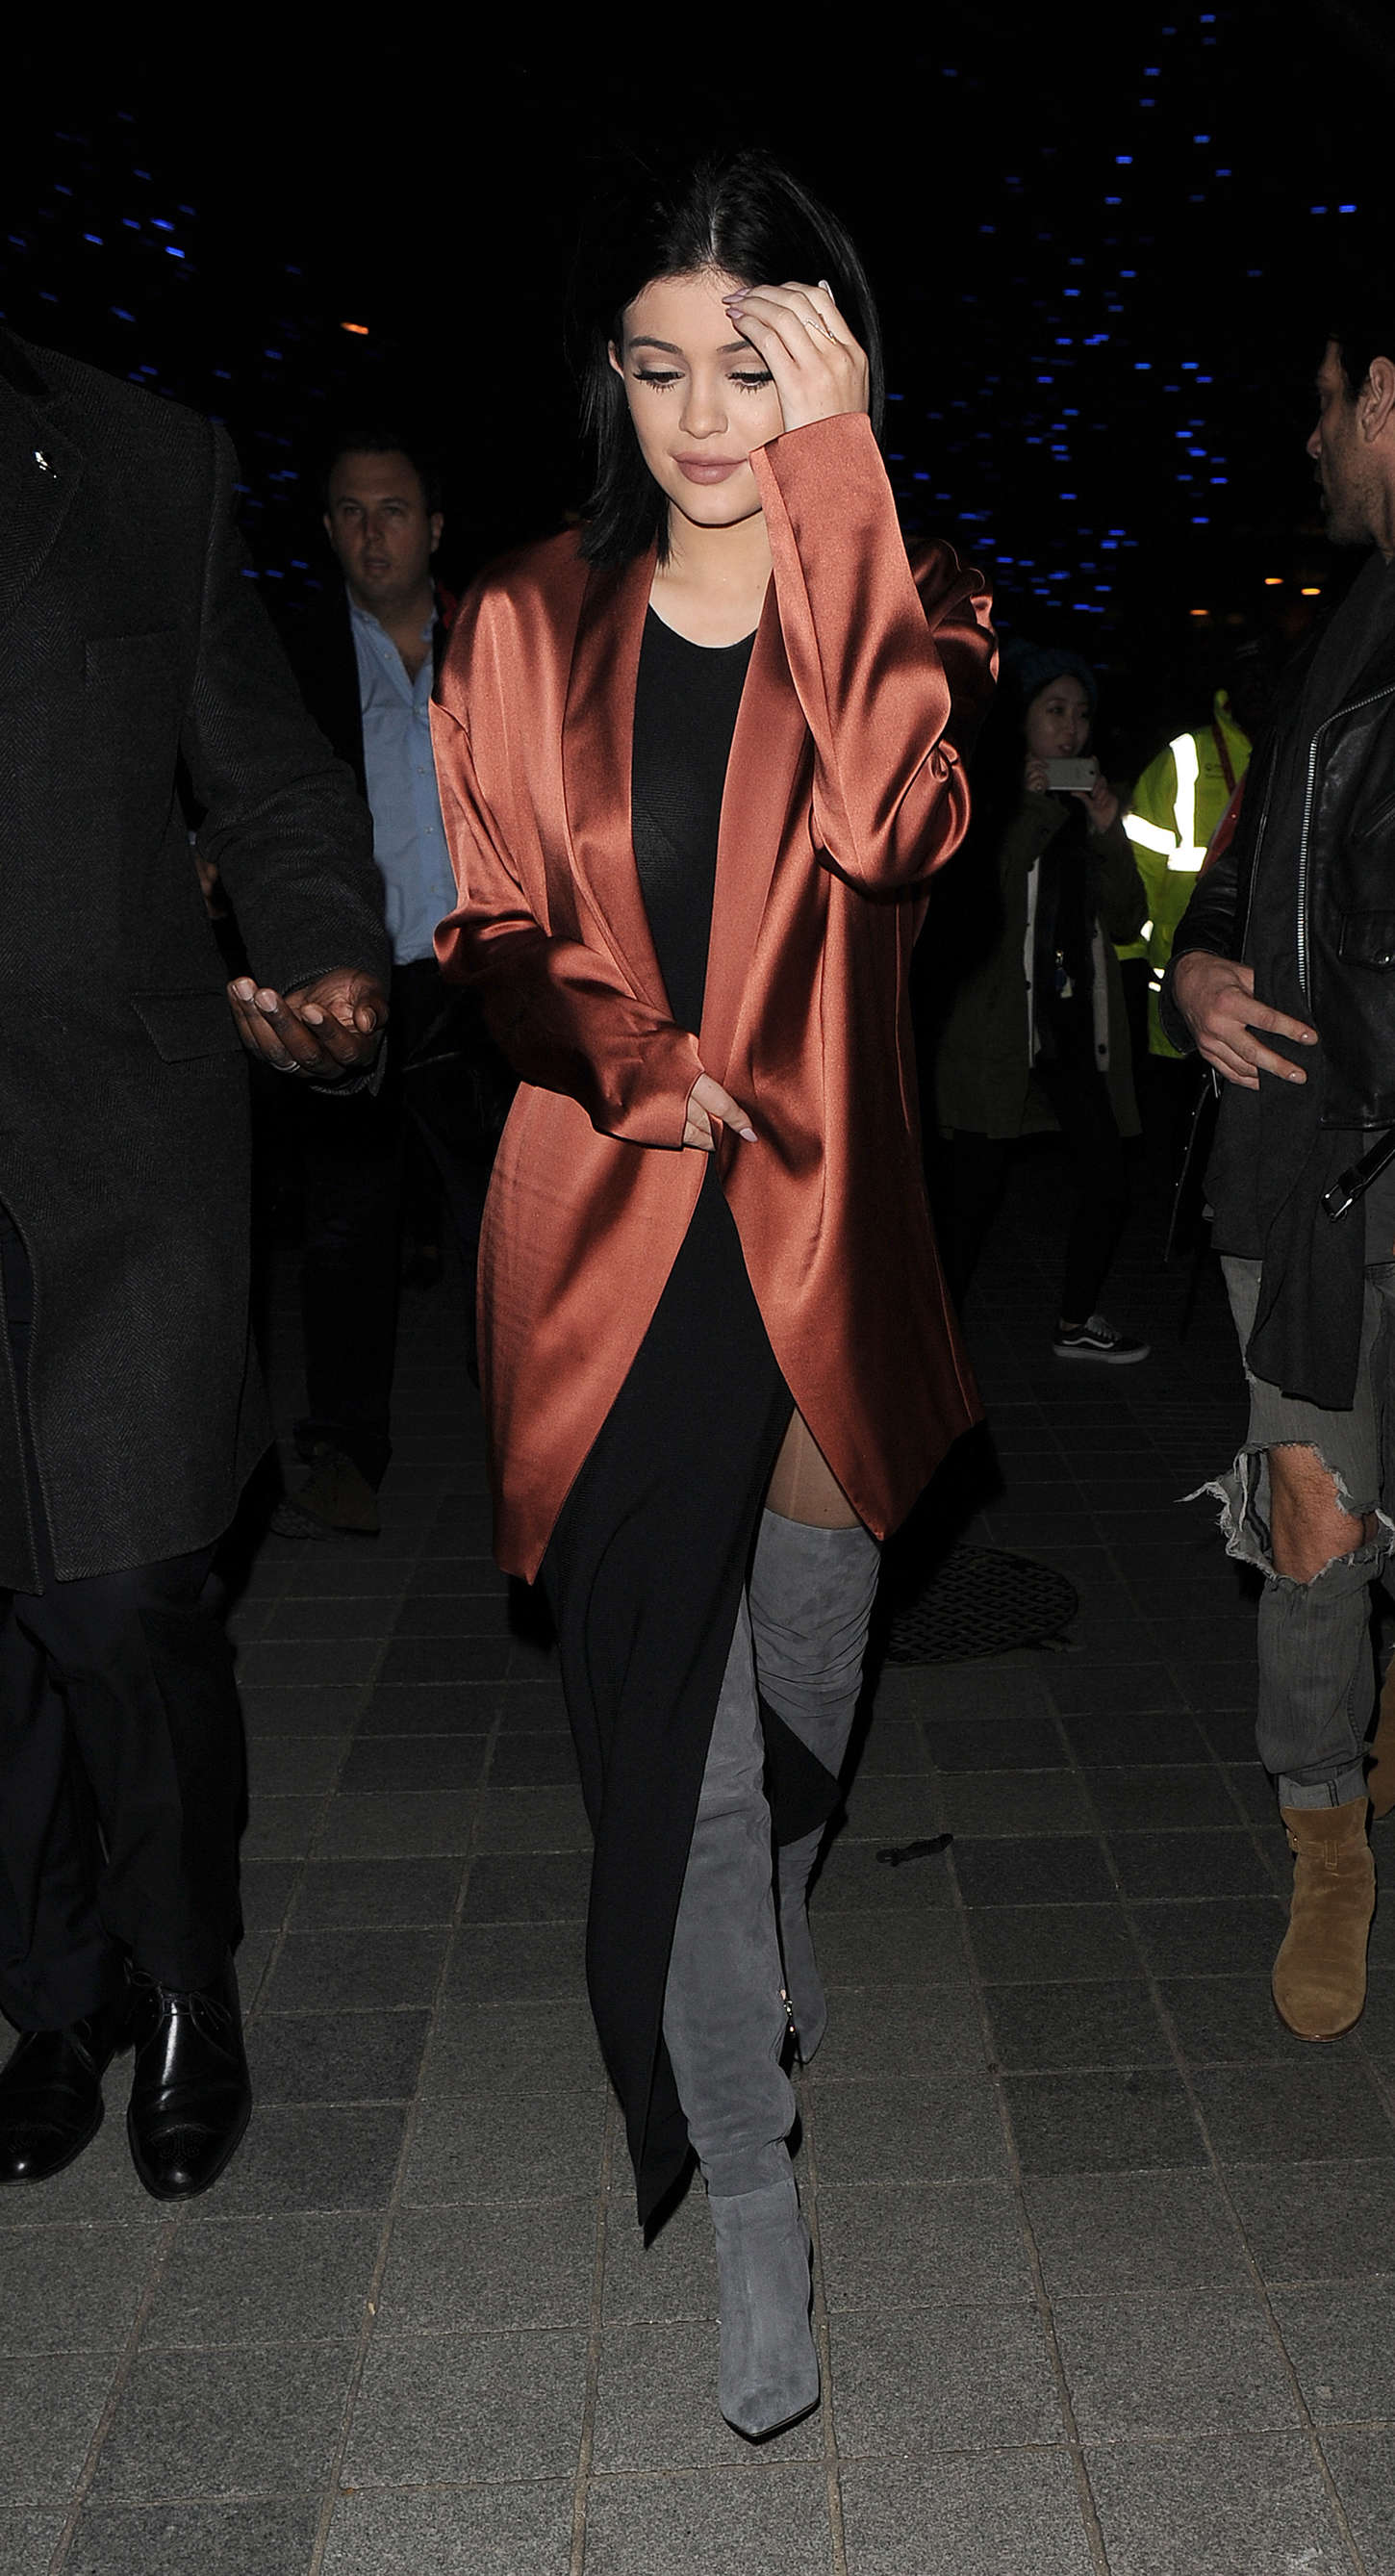 Kylie-Jenner-Night-Out-in-London--02.jpg